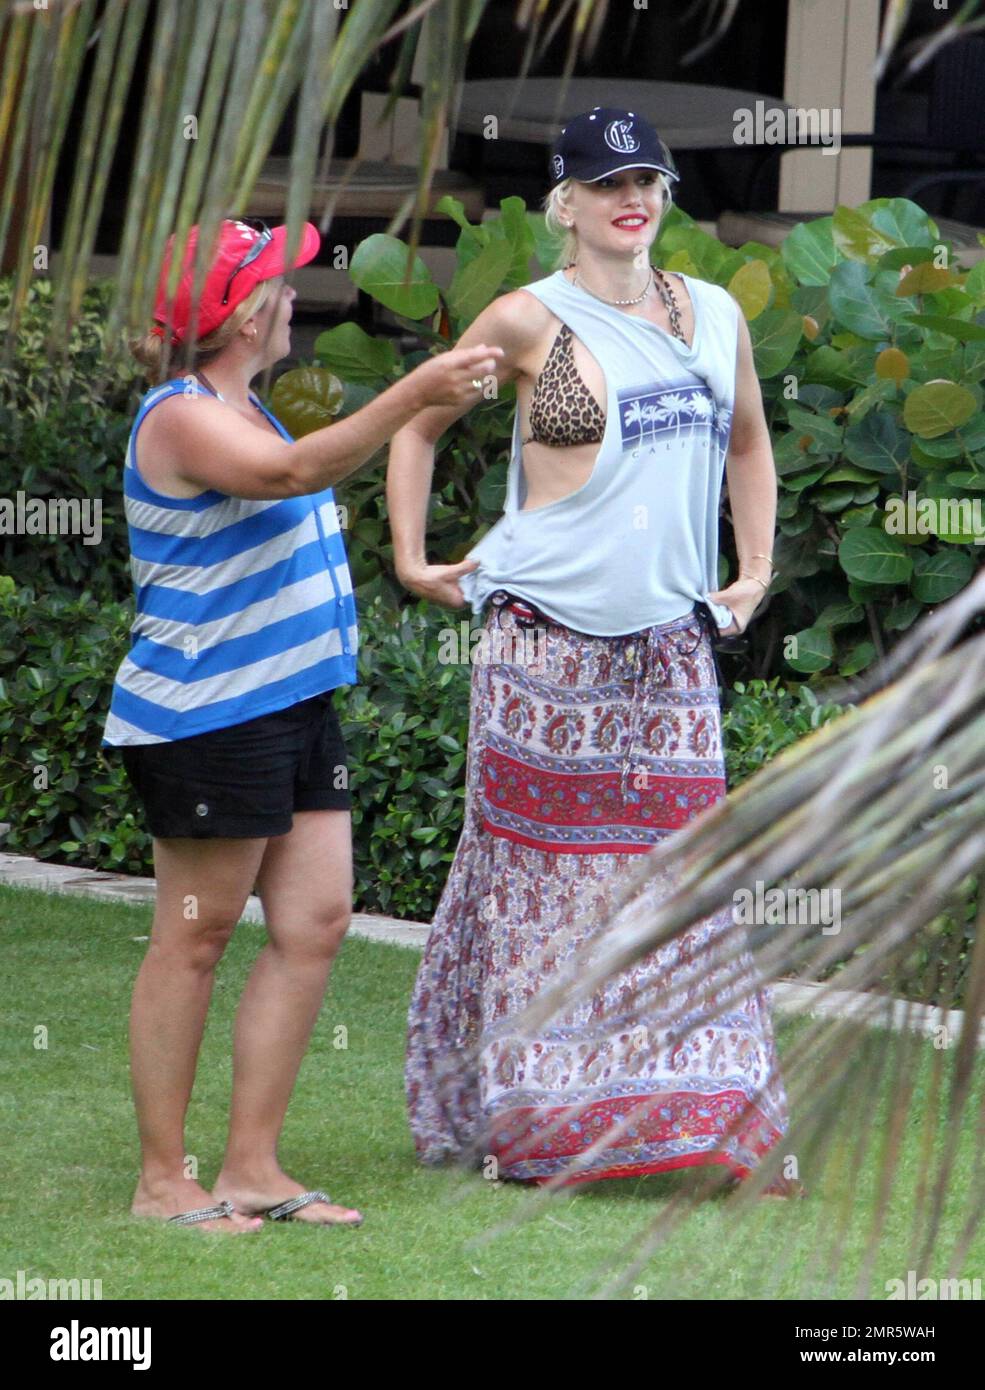 Gwen Stefani and husband Gavin Rossdale take a trip to the beach following an outing to a science museum with their two sons Kingston and Zuma. Gwen kept on a wrap and t-shirt but revealed an animal print bikini underneath. Despite rumors of marital problems, the couple shared a tender moment on th beach where they gazed lovingly into each other's eyes. A fellow hotel guest commented that the couple appeared sot;; 'very much in love' and that 'Gavin looks like a fantastic dad'. They added that Gwen was 'absolutely beautiful in person'. After sunset the couple took a dip in the hot tub and sipp Stock Photo